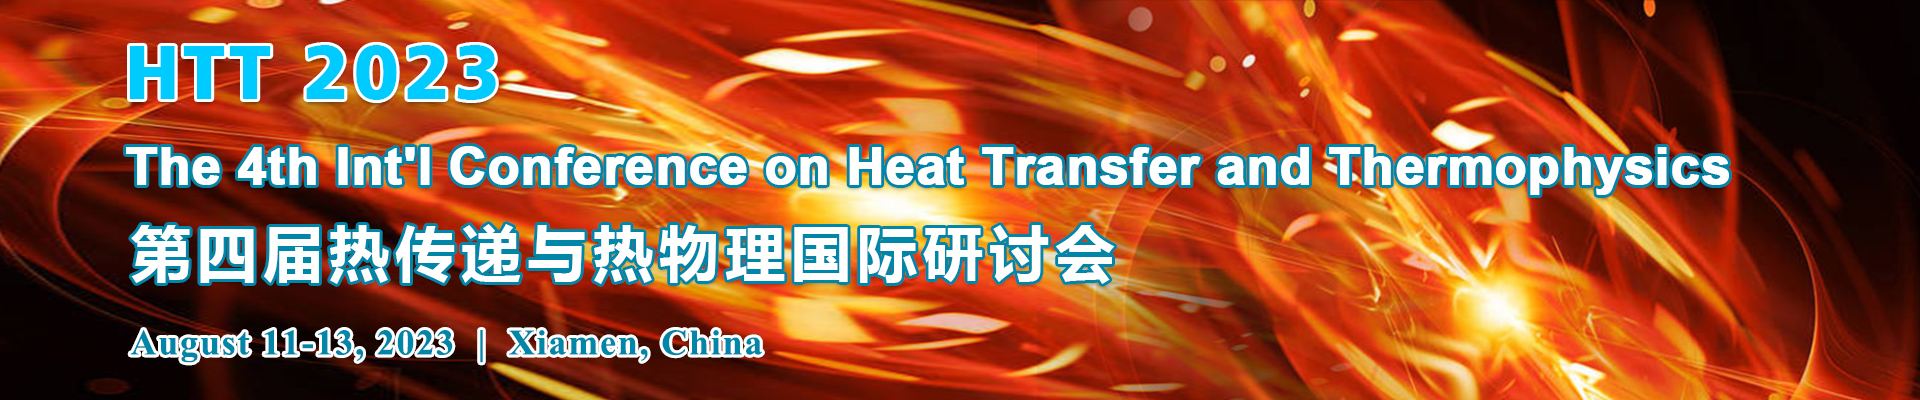 The 4th Int'l Conference on Heat Transfer and Thermophysics (HTT 2023)